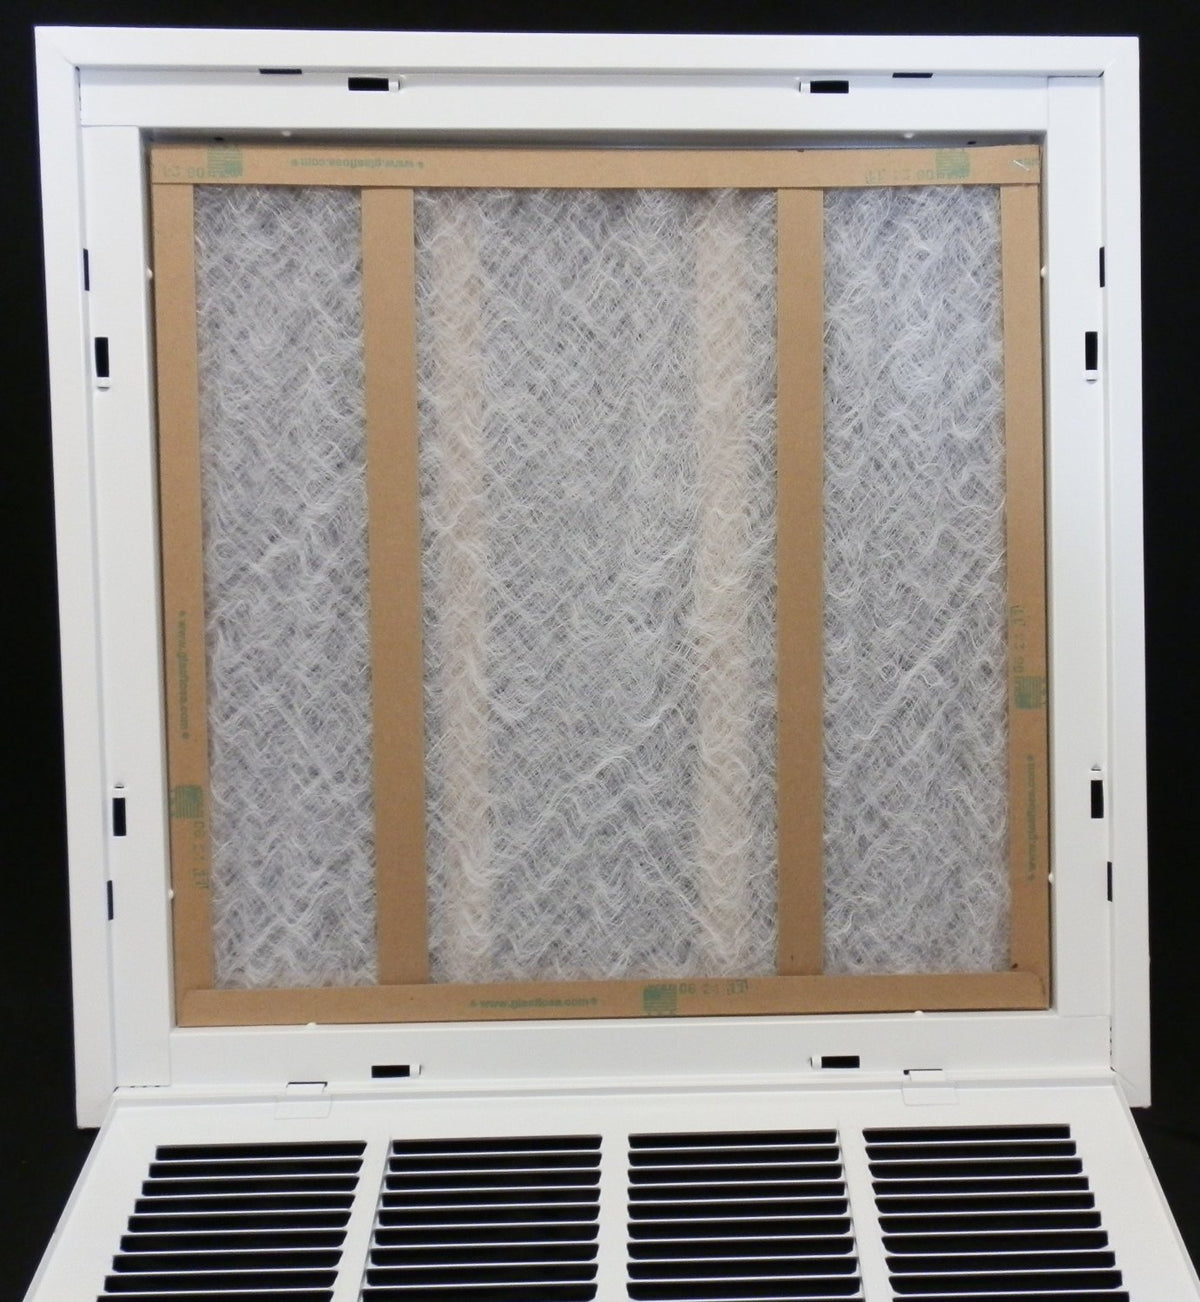 25&quot; X 14&quot; Steel Return Air Filter Grille for 1&quot; Filter - Removable Frame - [Outer Dimensions: 27 5/8&quot; X 16 5/8&quot;]